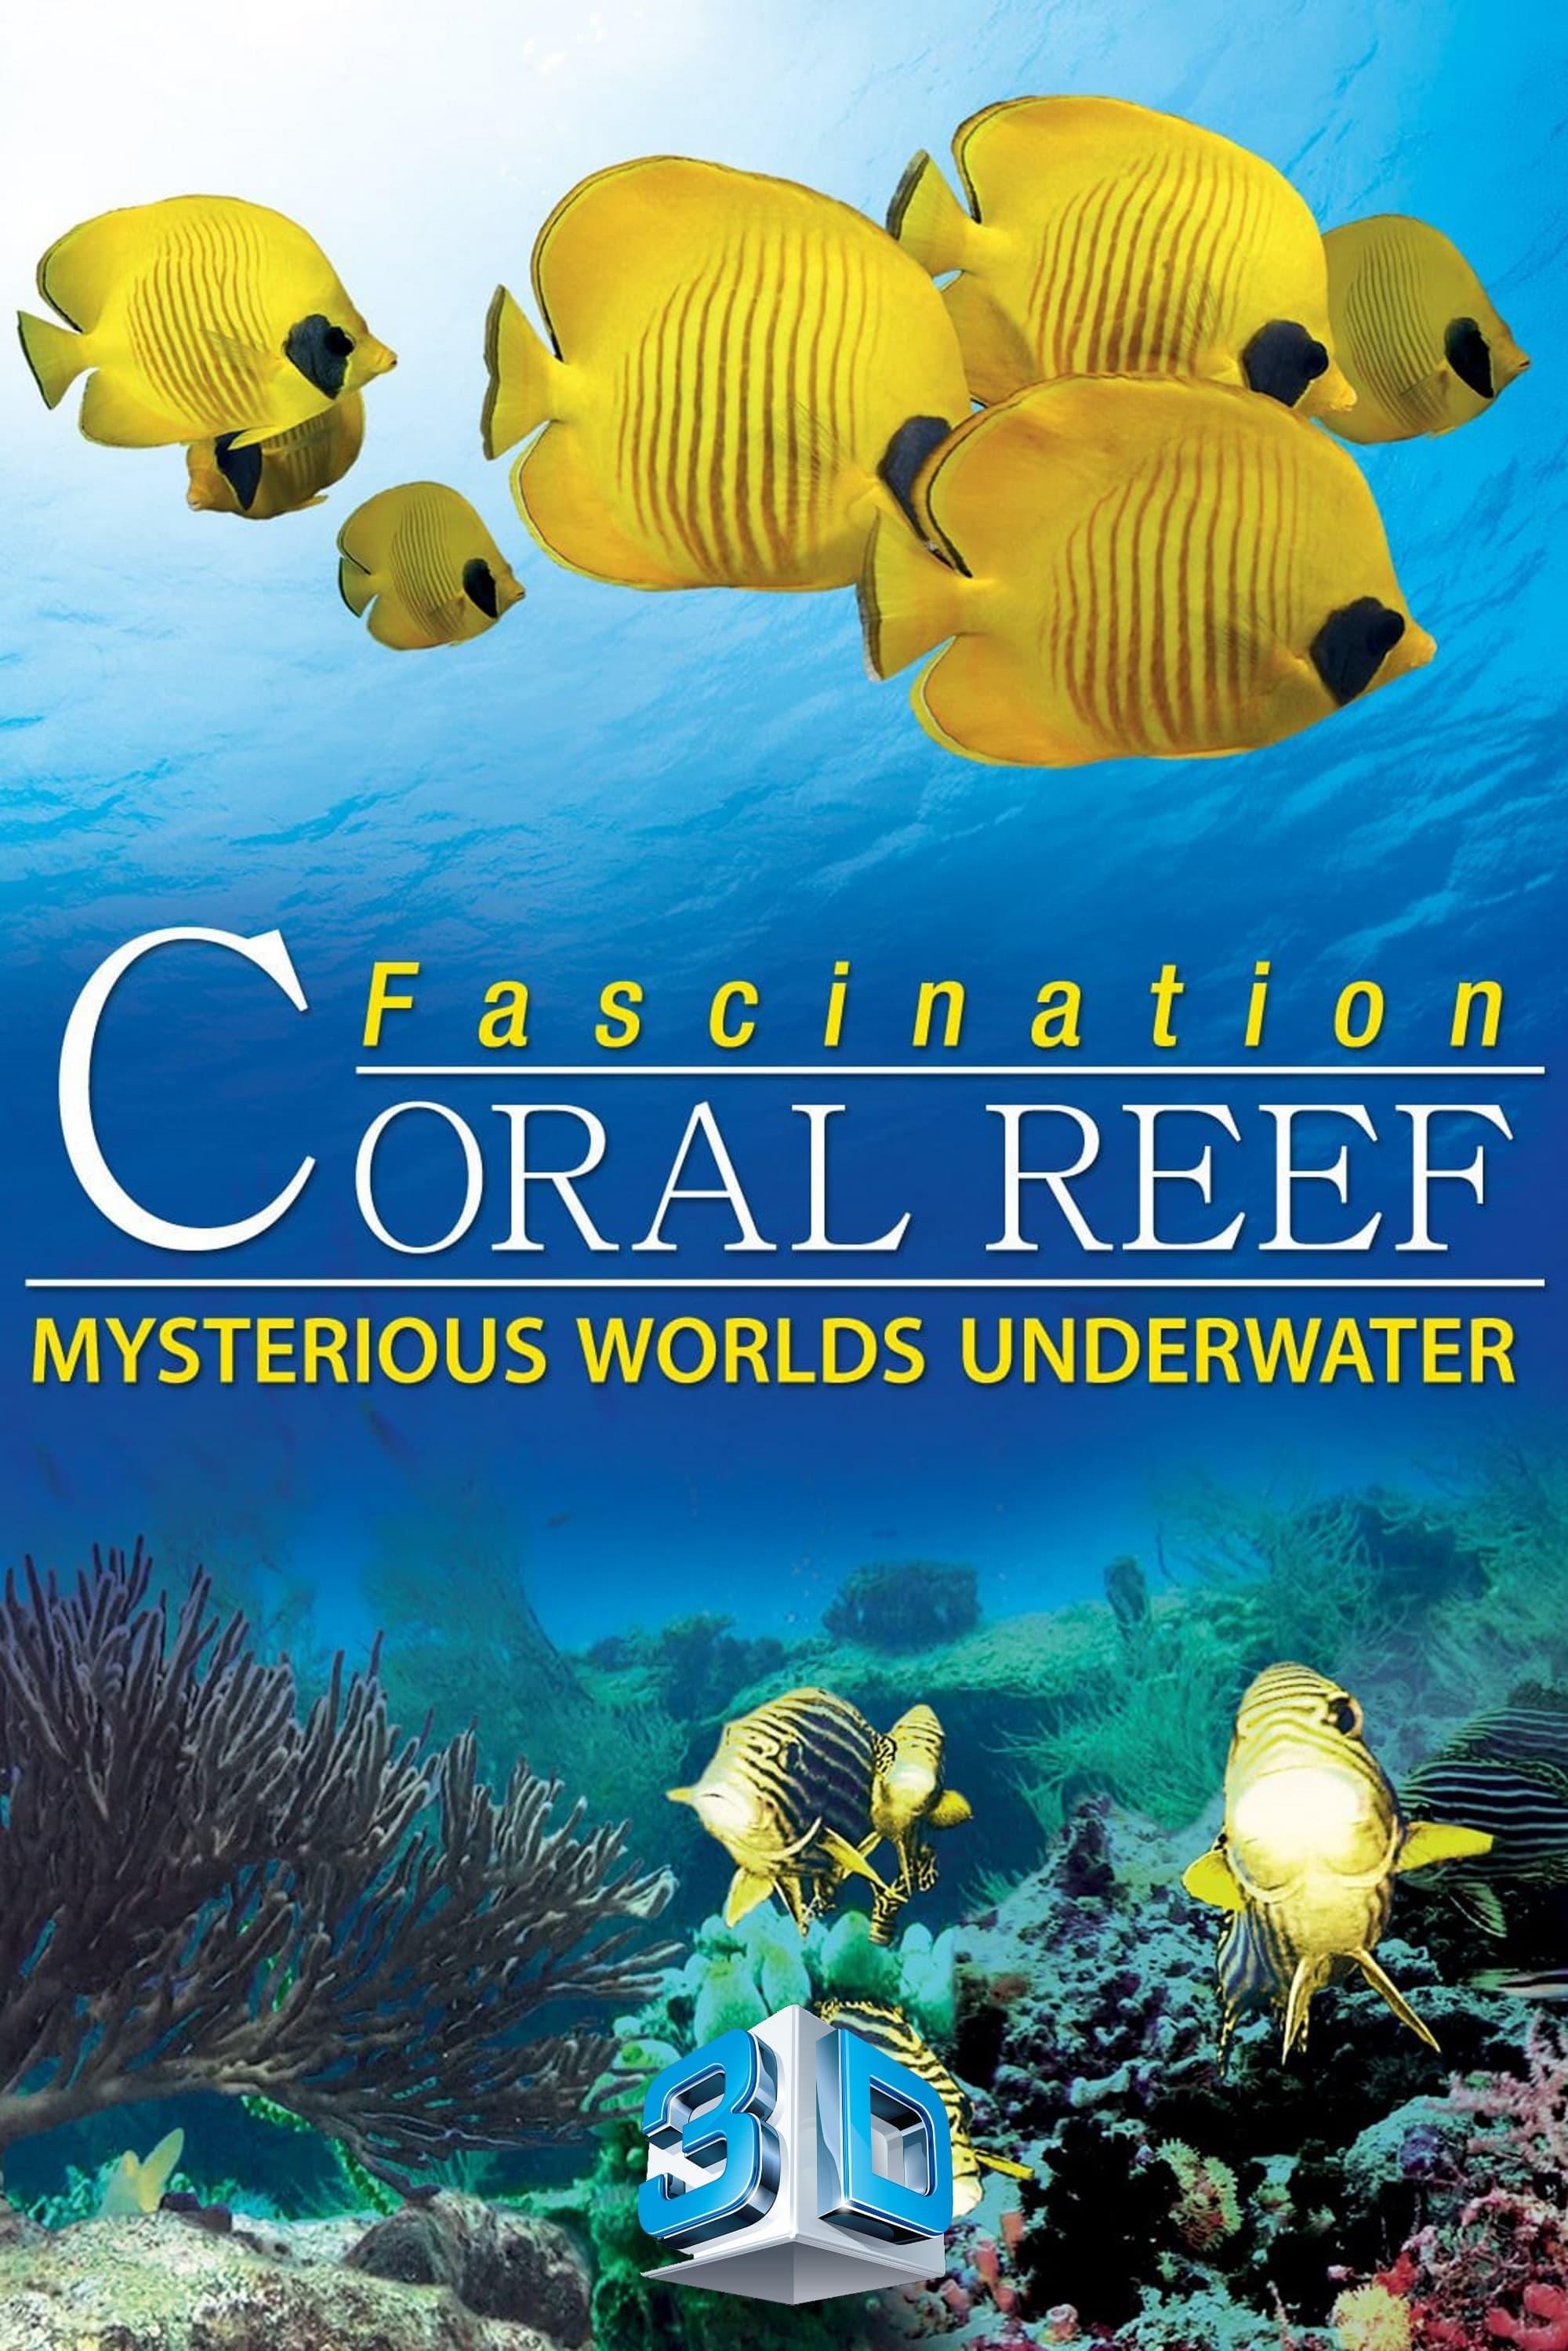 Fascination Coral Reef: Mysterious Worlds Underwater poster